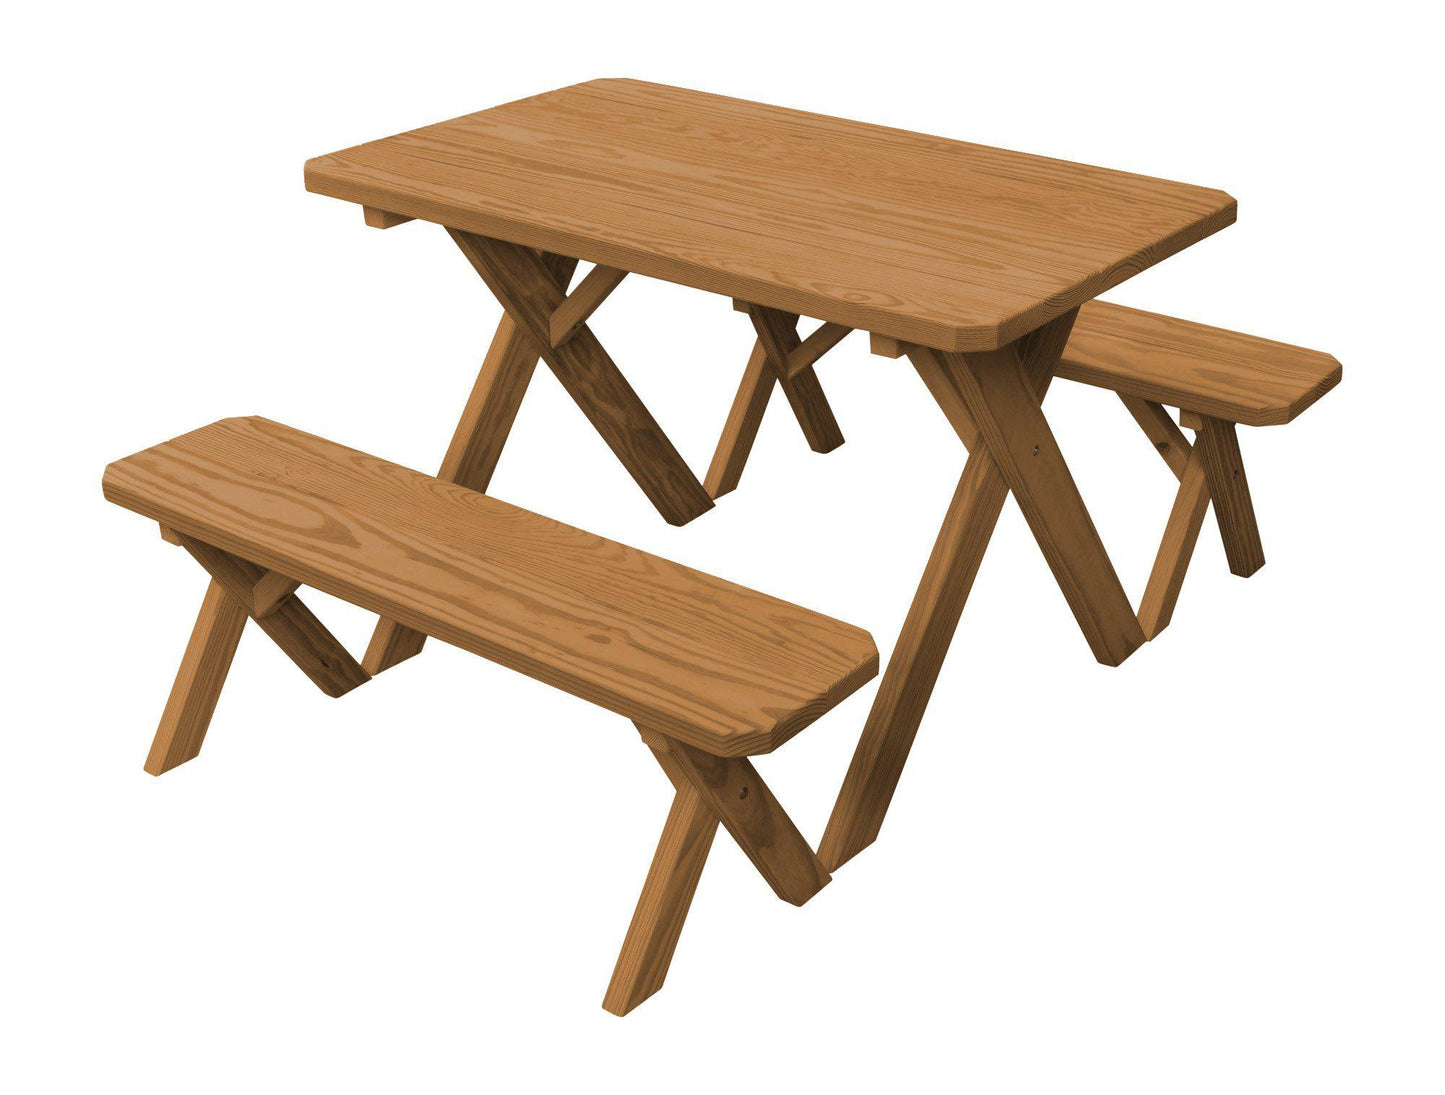 A&L Furniture Co. Yellow Pine 5' Cross-leg Table w/2 Benches - Umbrella Hole - LEAD TIME TO SHIP 10 BUSINESS DAYS